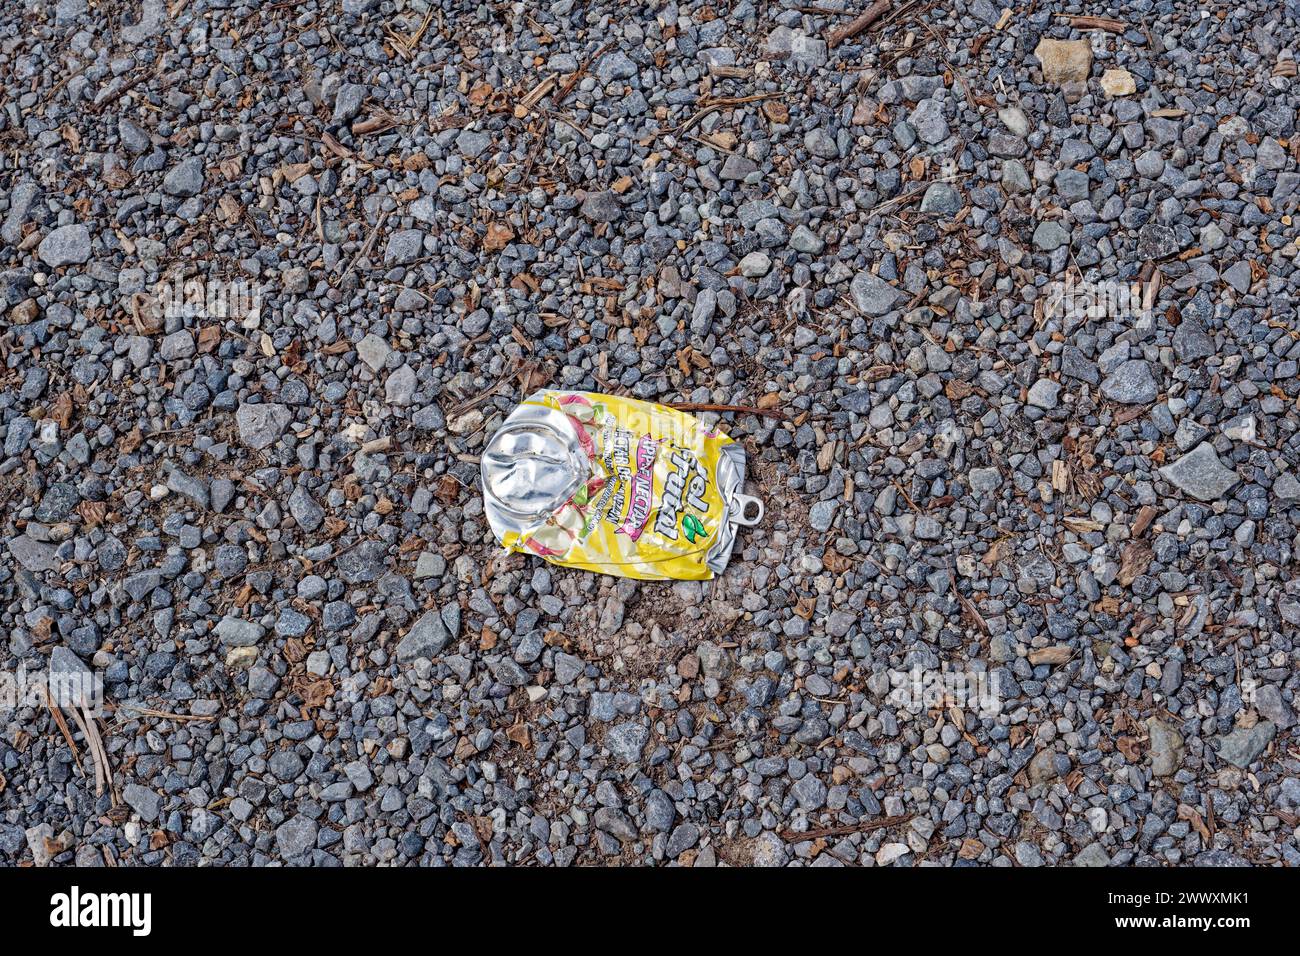 A bright and colorful soda or juice can flatten on the ground in the gravel parking lot closeup view with copy space Stock Photo